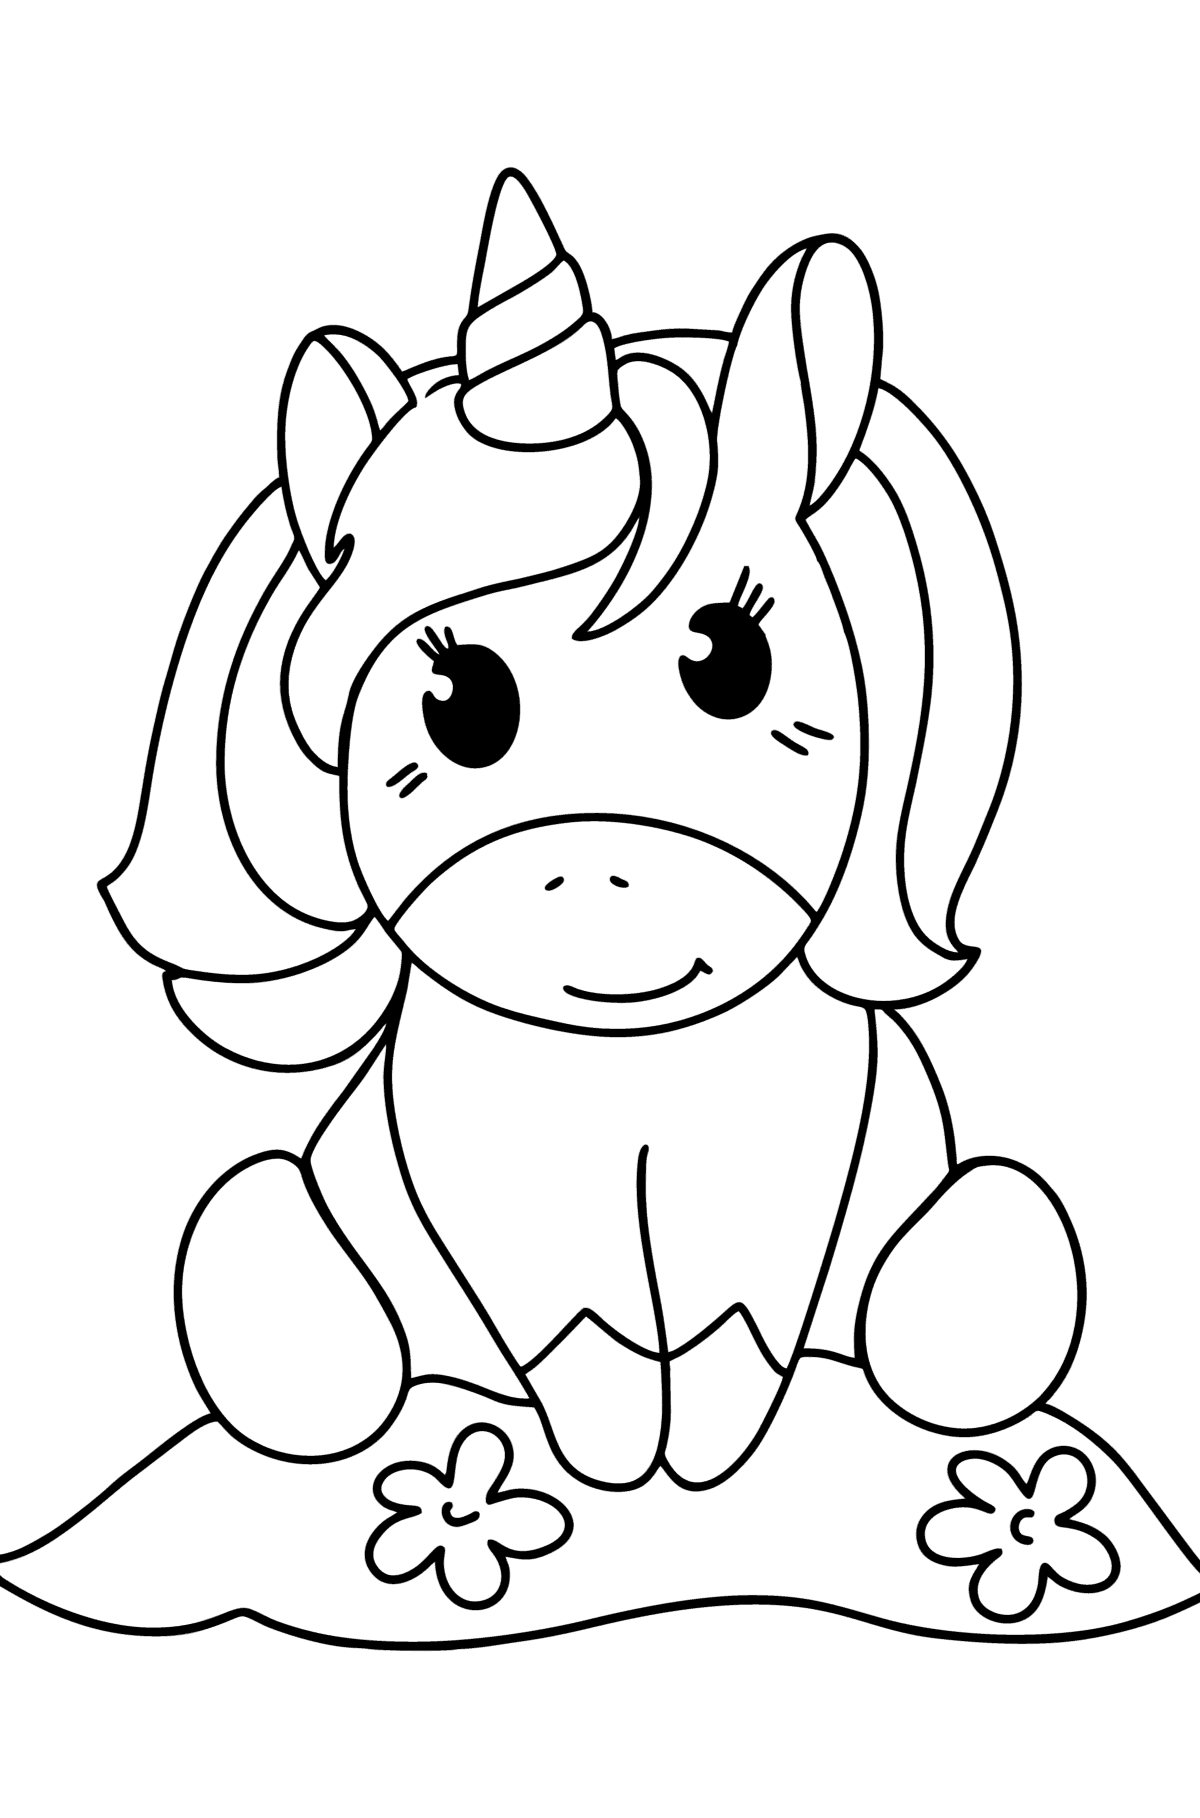 Cartoon unicorn coloring page ♥ Online and Print for Free